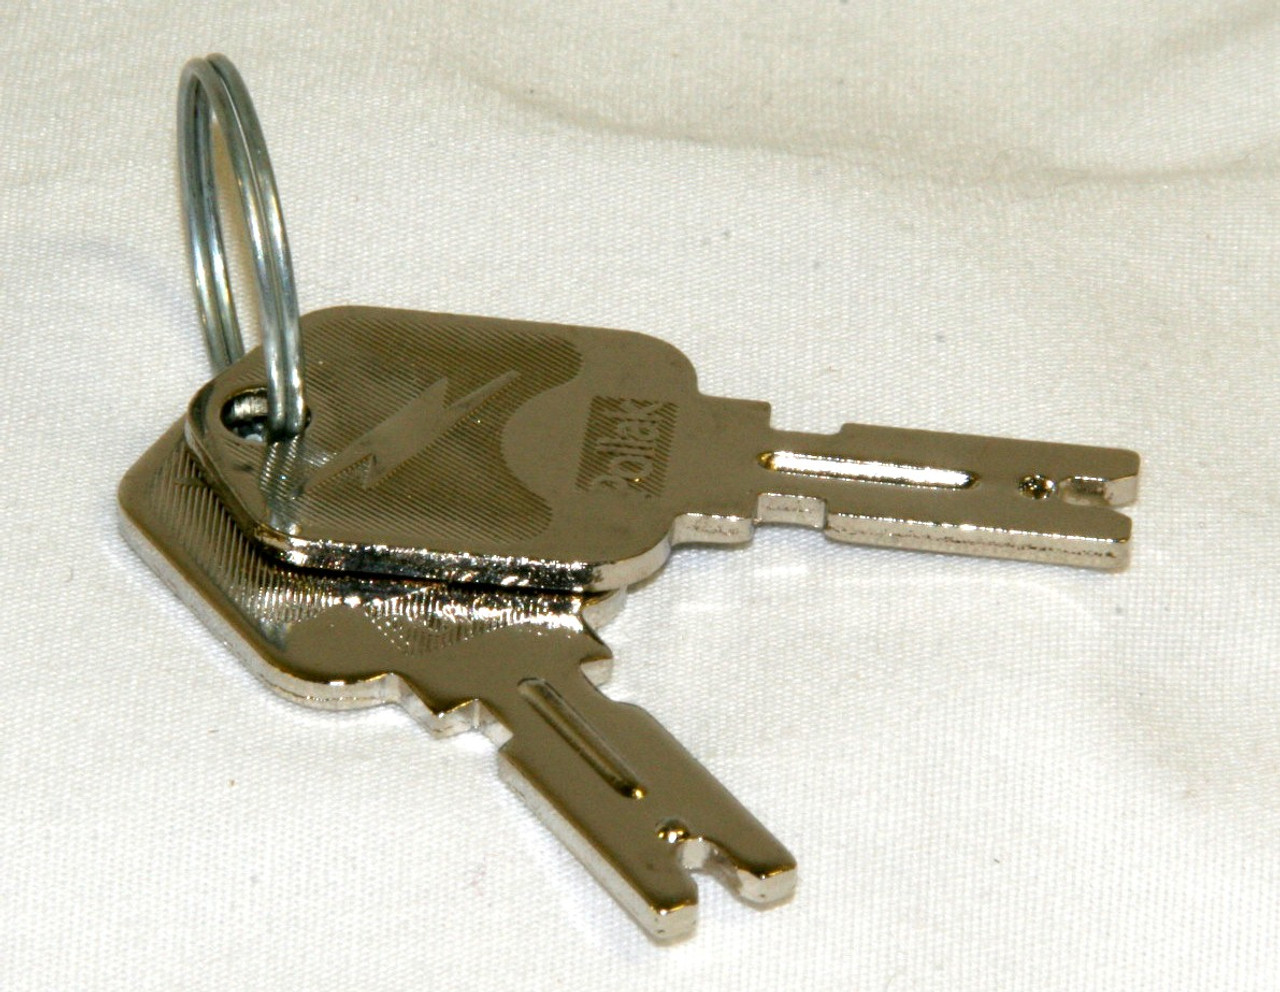 56478641: American Lincoln Aftermarket Key